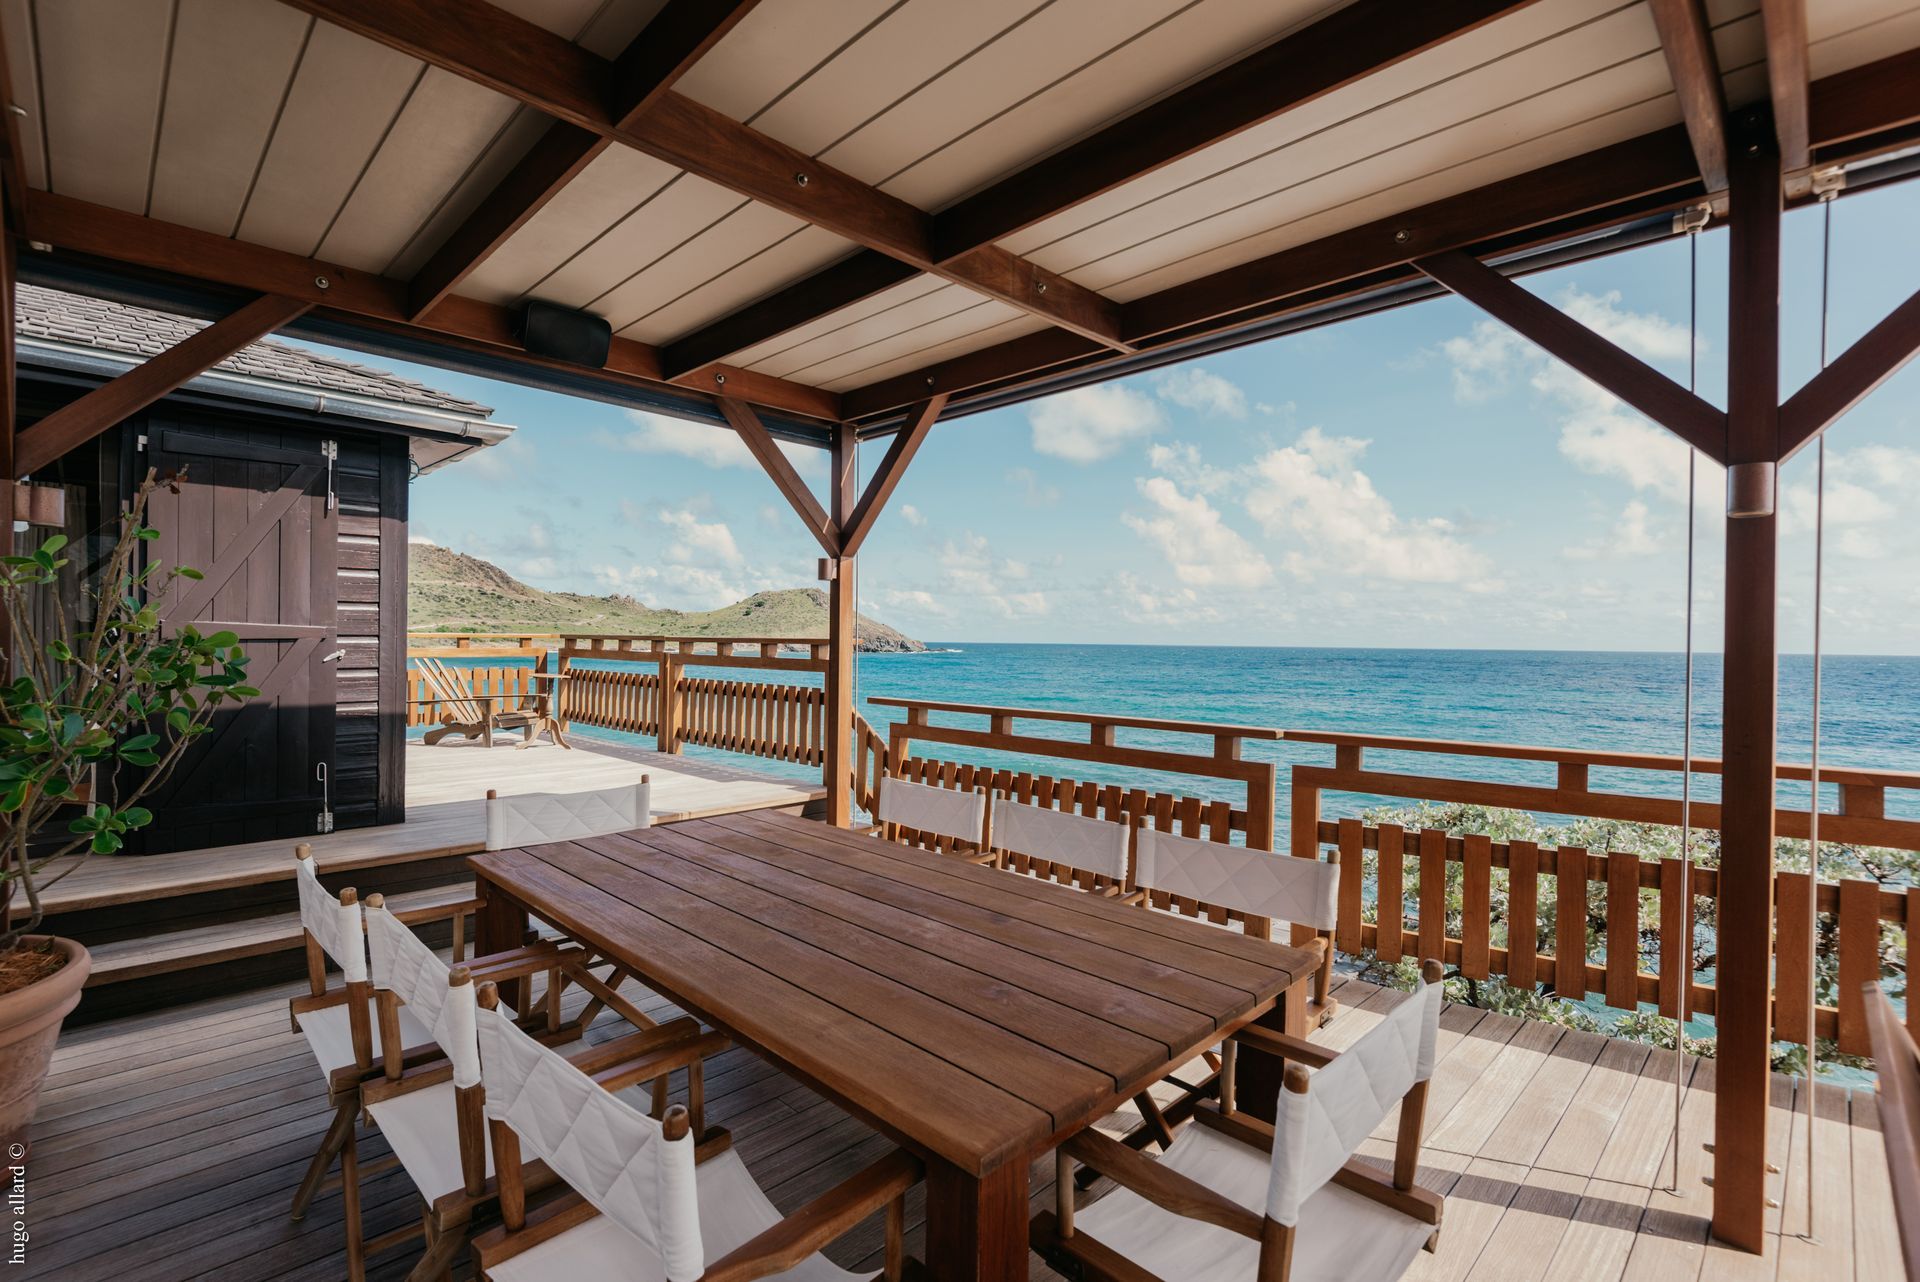 a wooden table and chairs on a deck overlooking the ocean